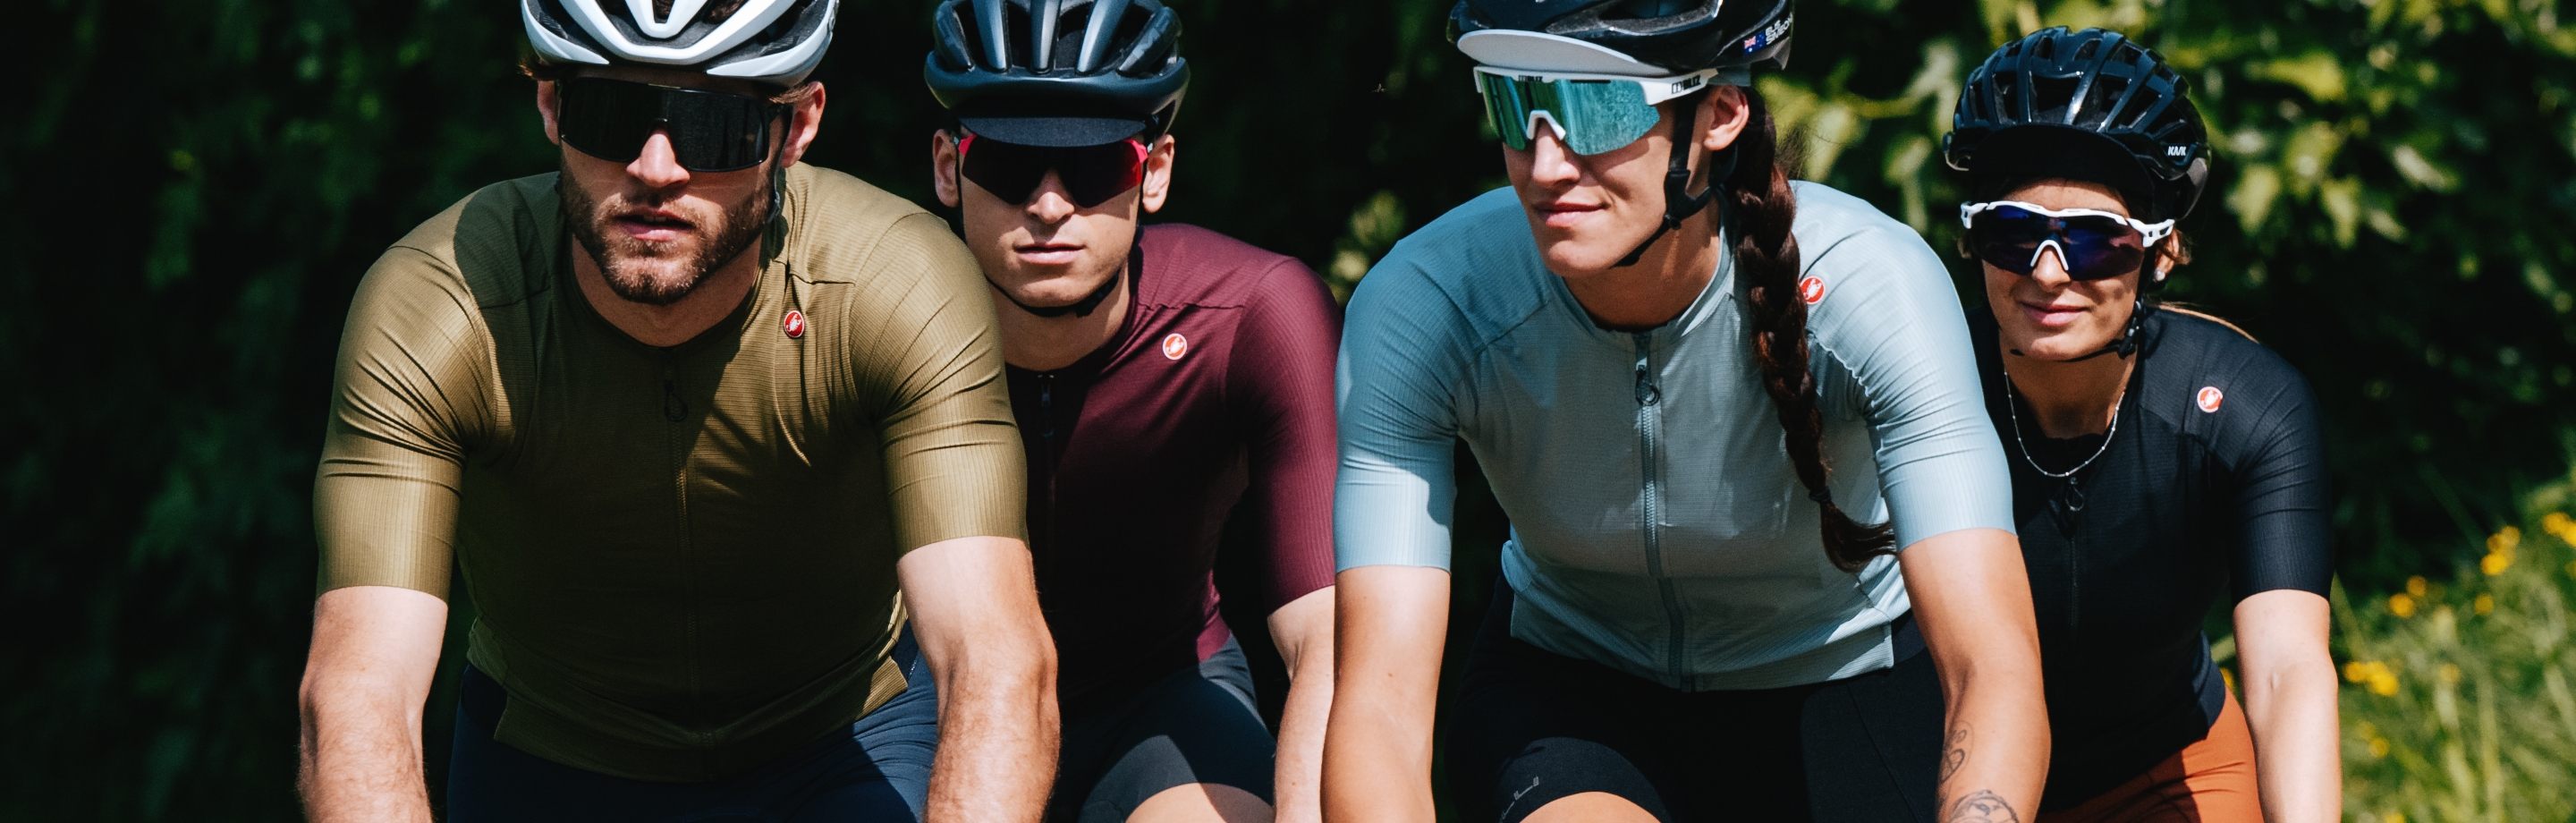 Castelli – High-quality bicycle clothing from Italy